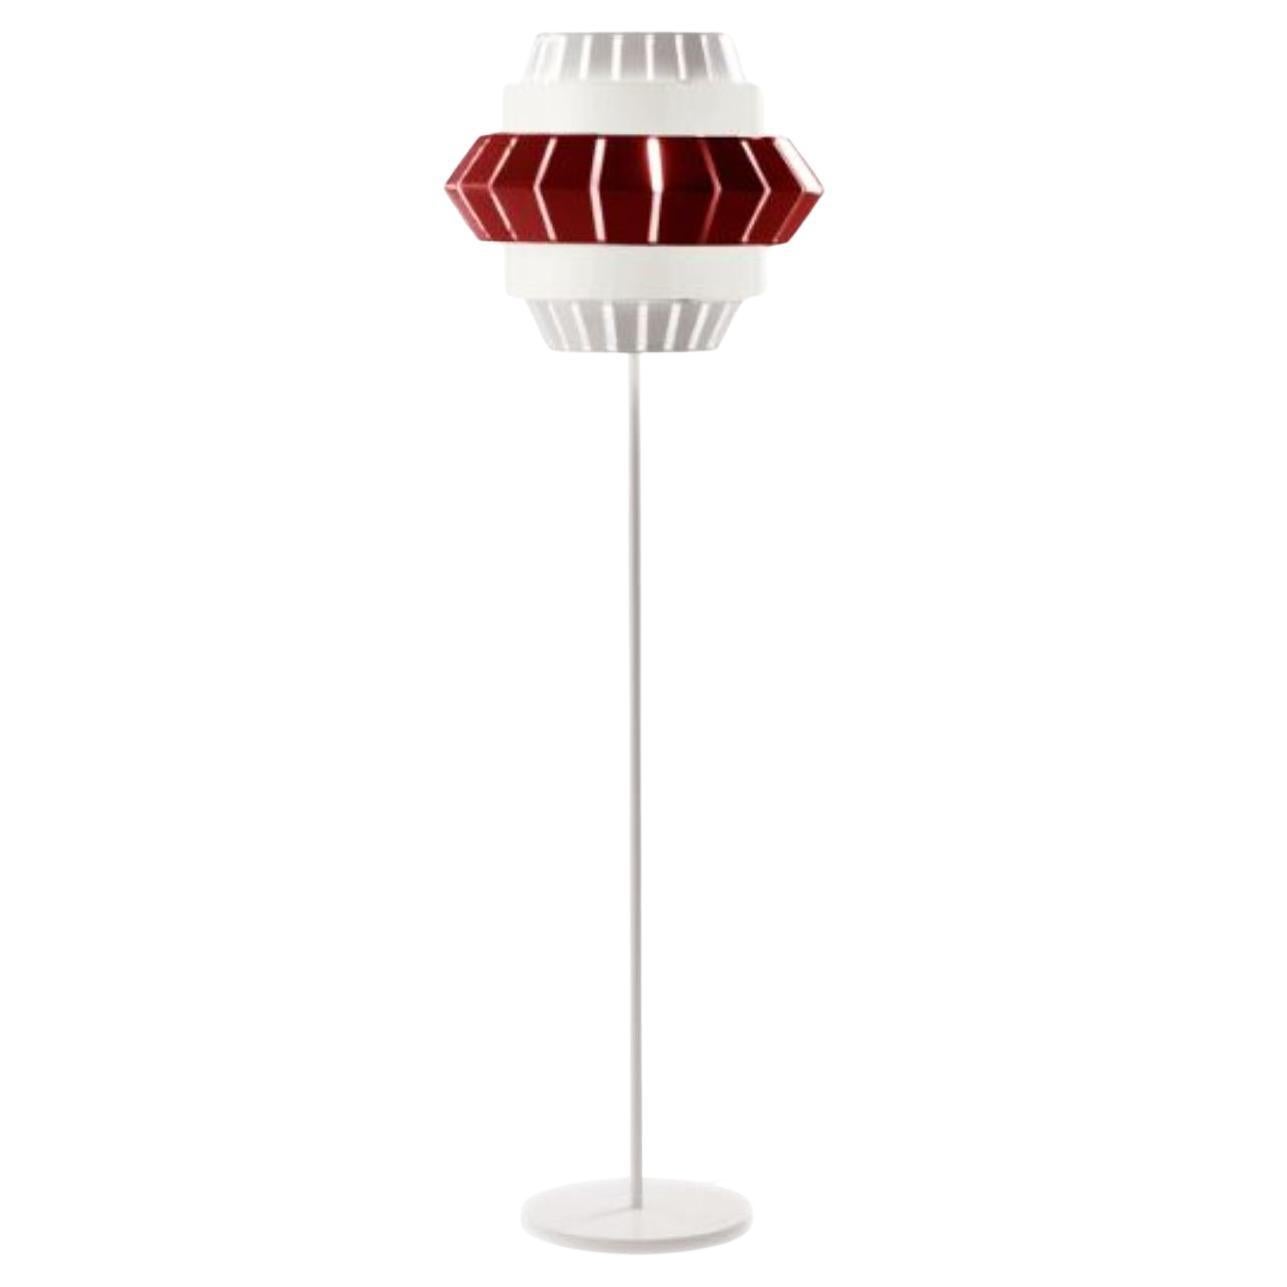 Ivory and Lipstick Comb Floor Lamp by Dooq